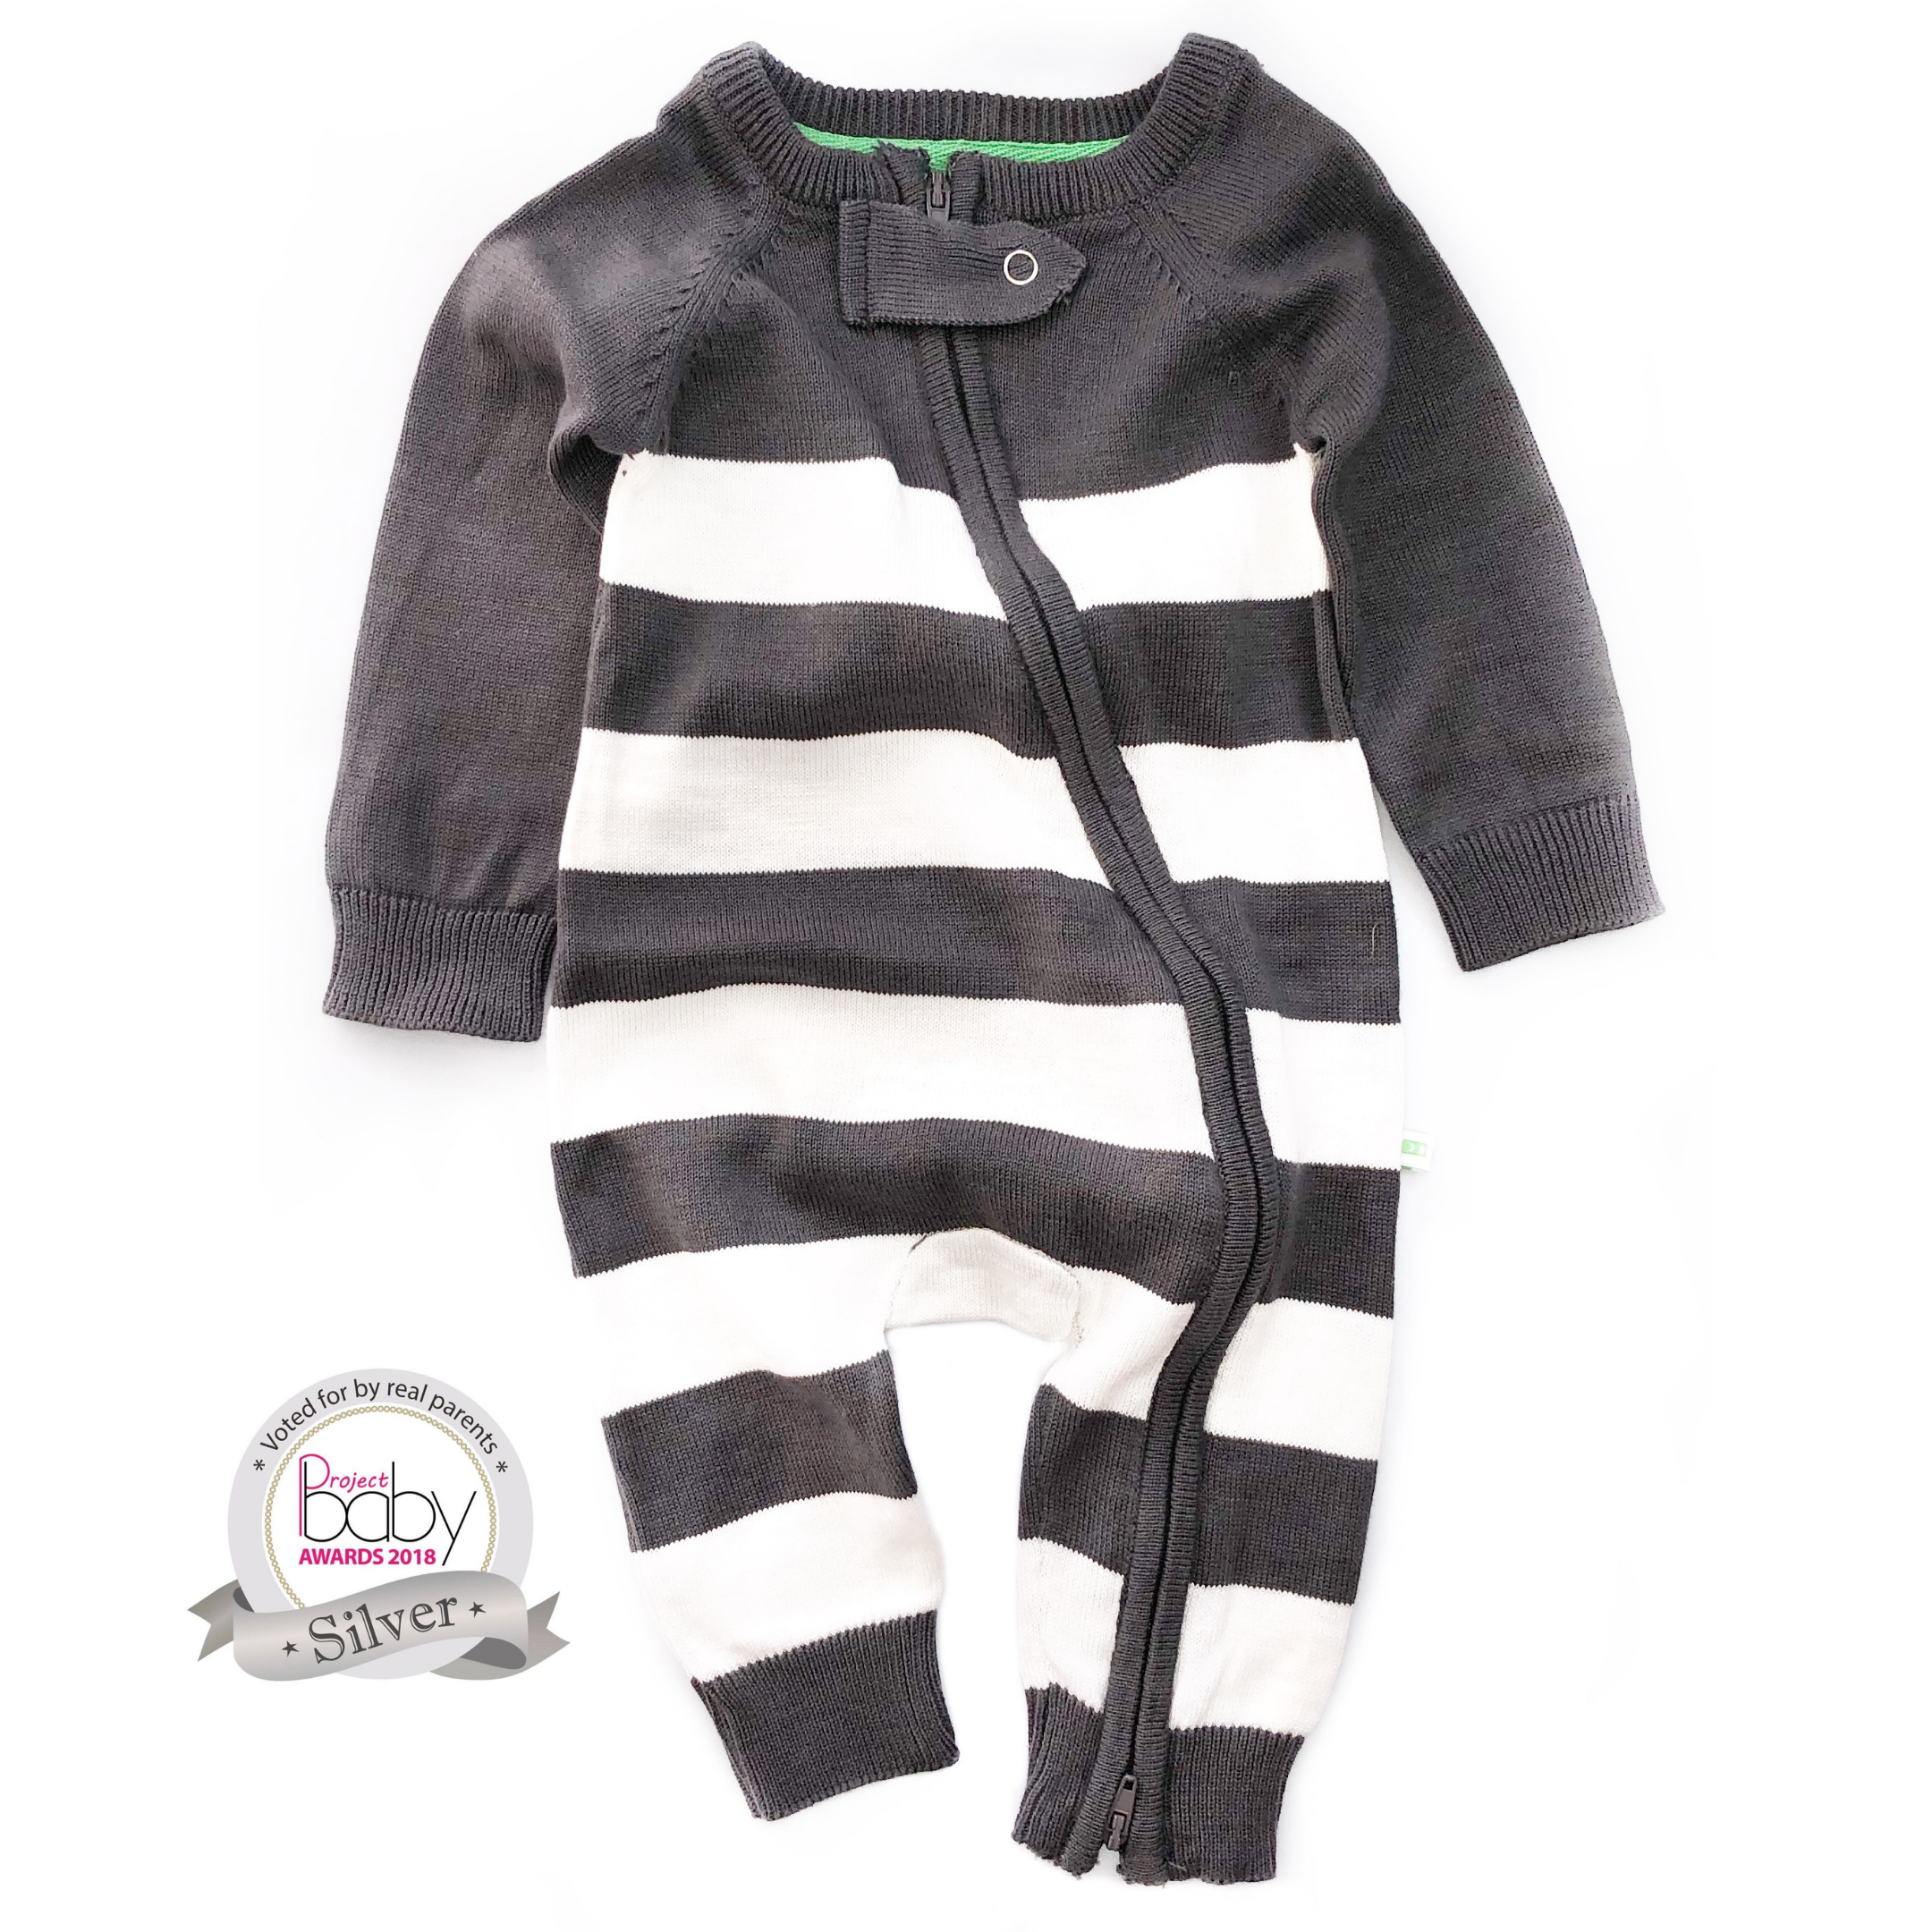 Super Soft Charcoal Stripe Knitted Baby Onesie